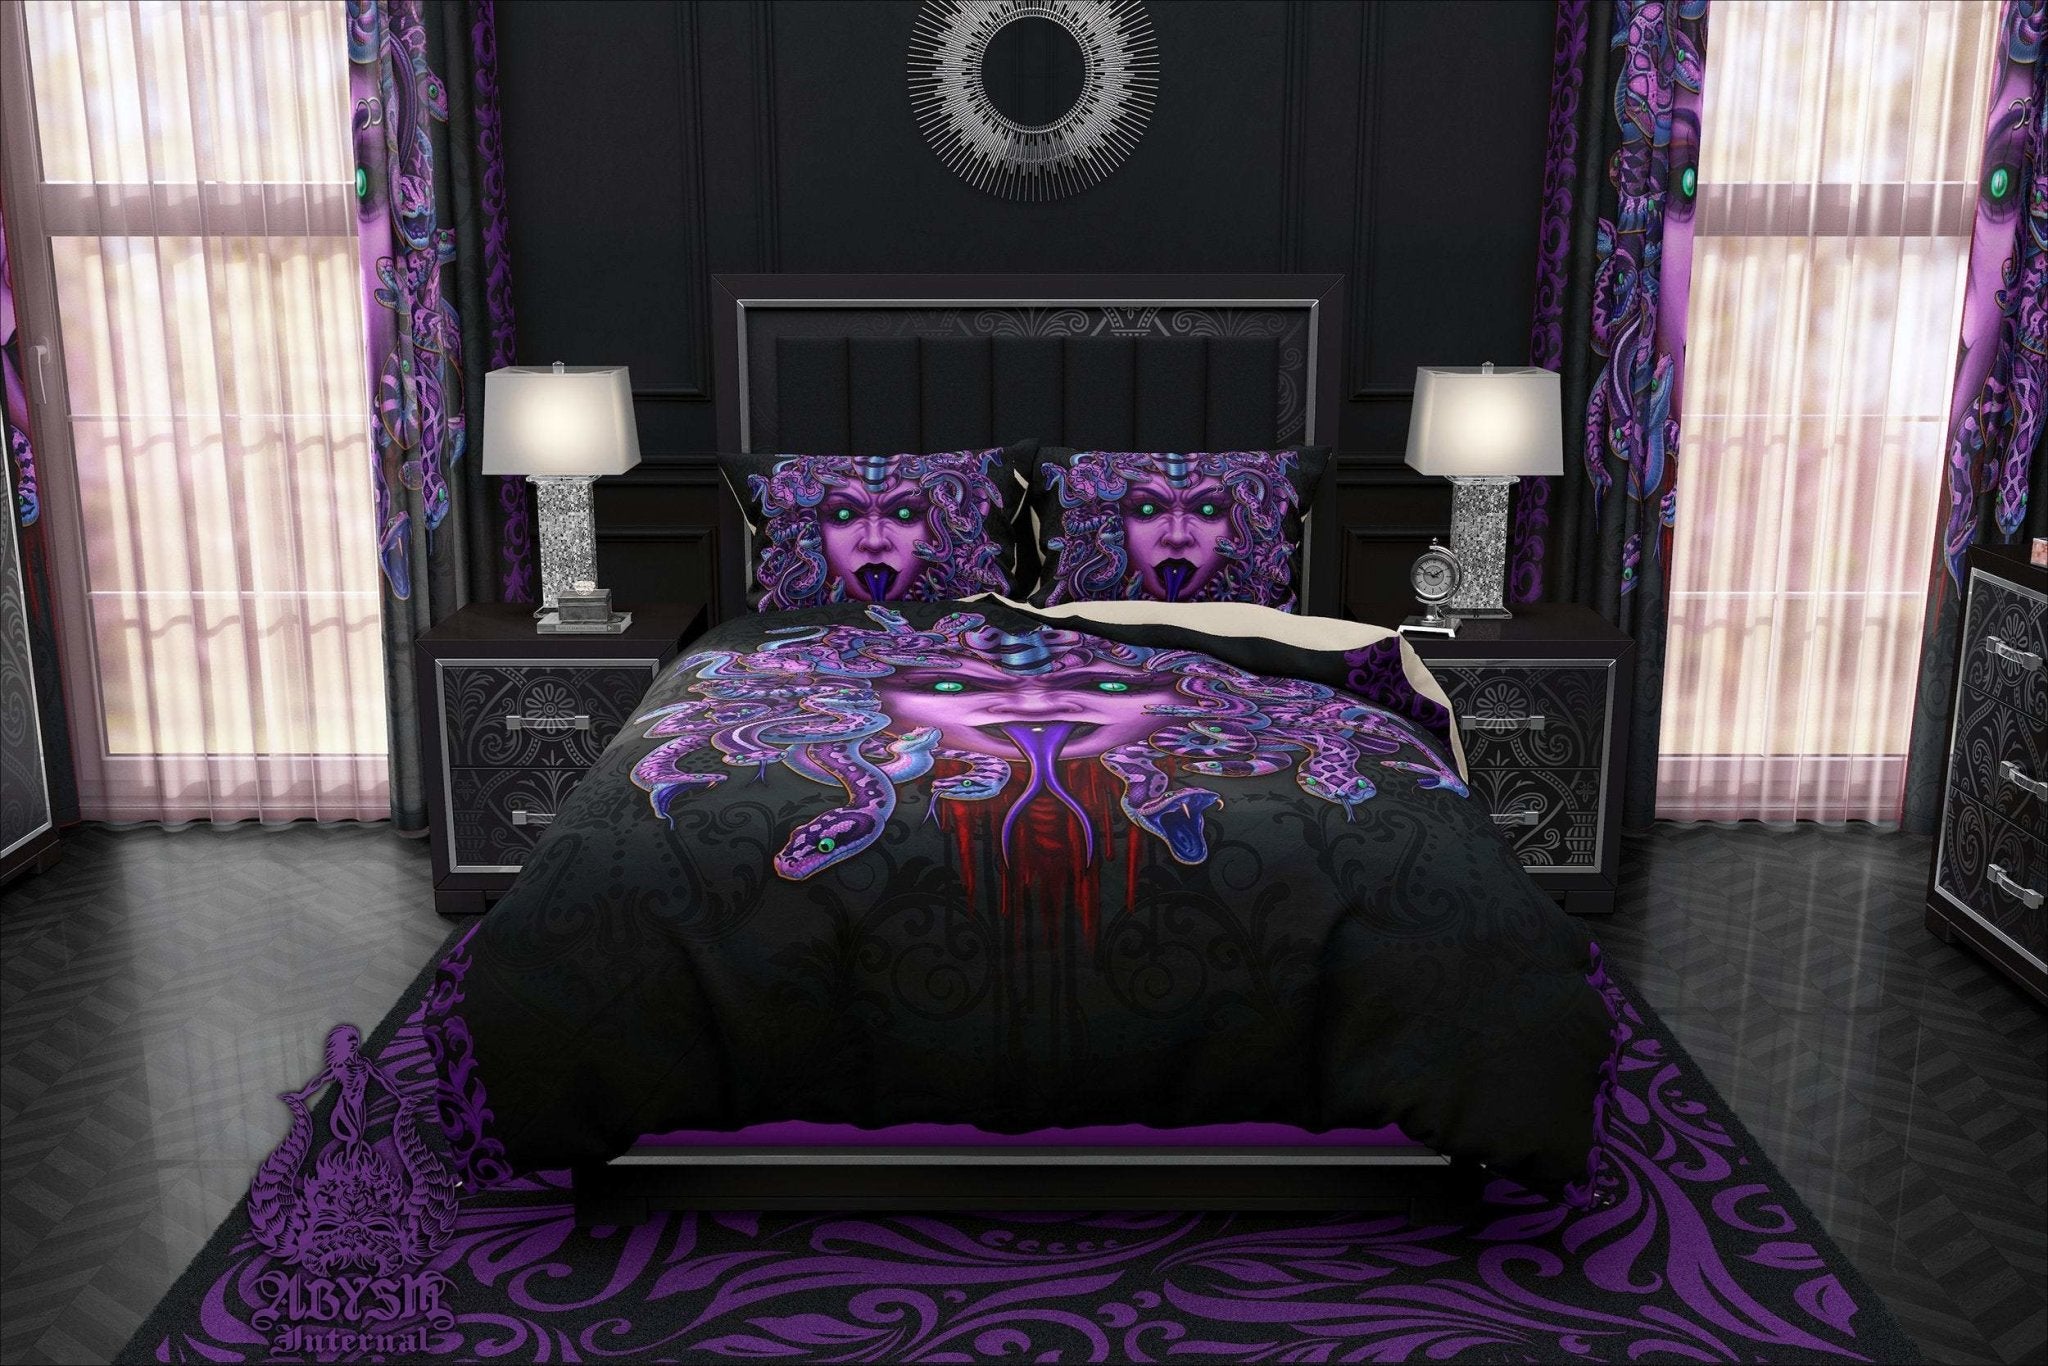 Pastel Goth Bedding Set, Comforter and Duvet, Gothic Bed Cover and Bedroom Decor, King, Queen and Twin Size - Black and Purple Medusa, - Abysm Internal